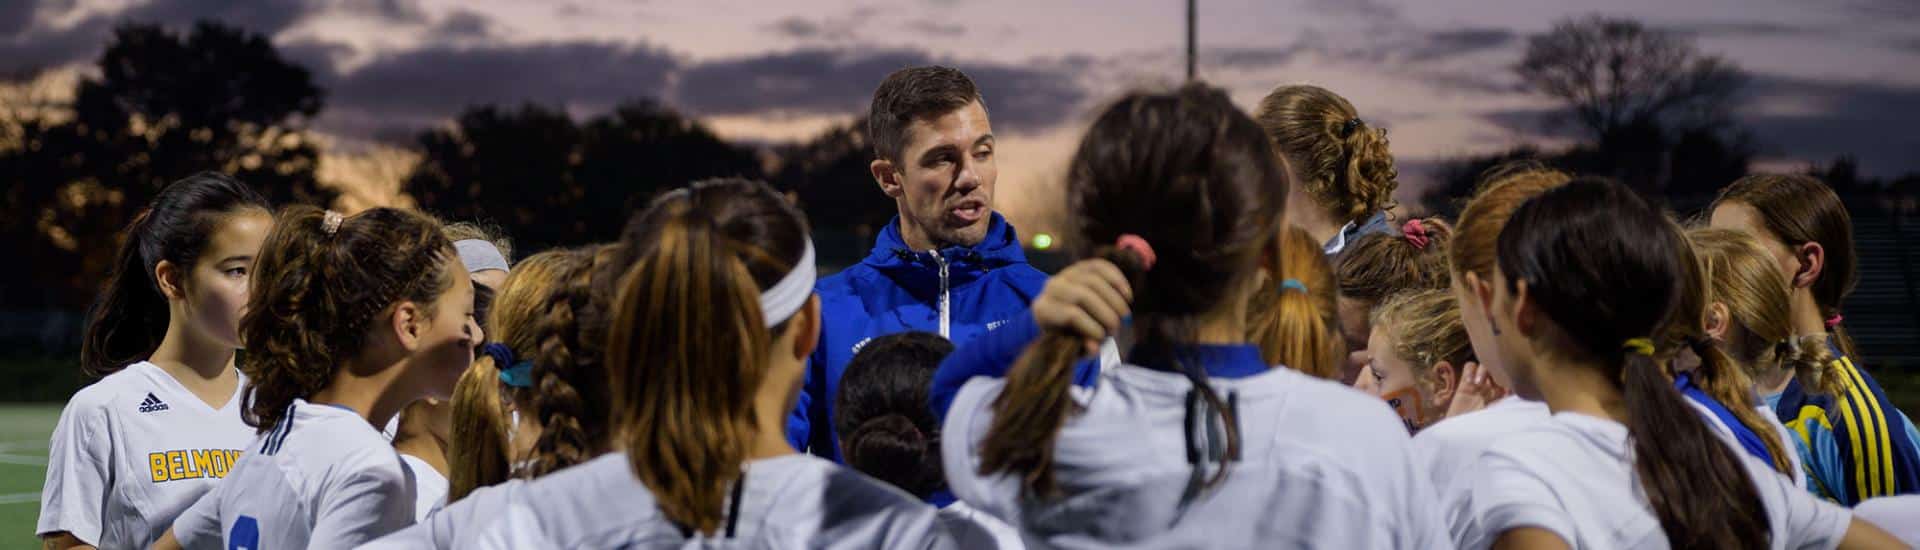 A coach discusses game strategy with soccer players